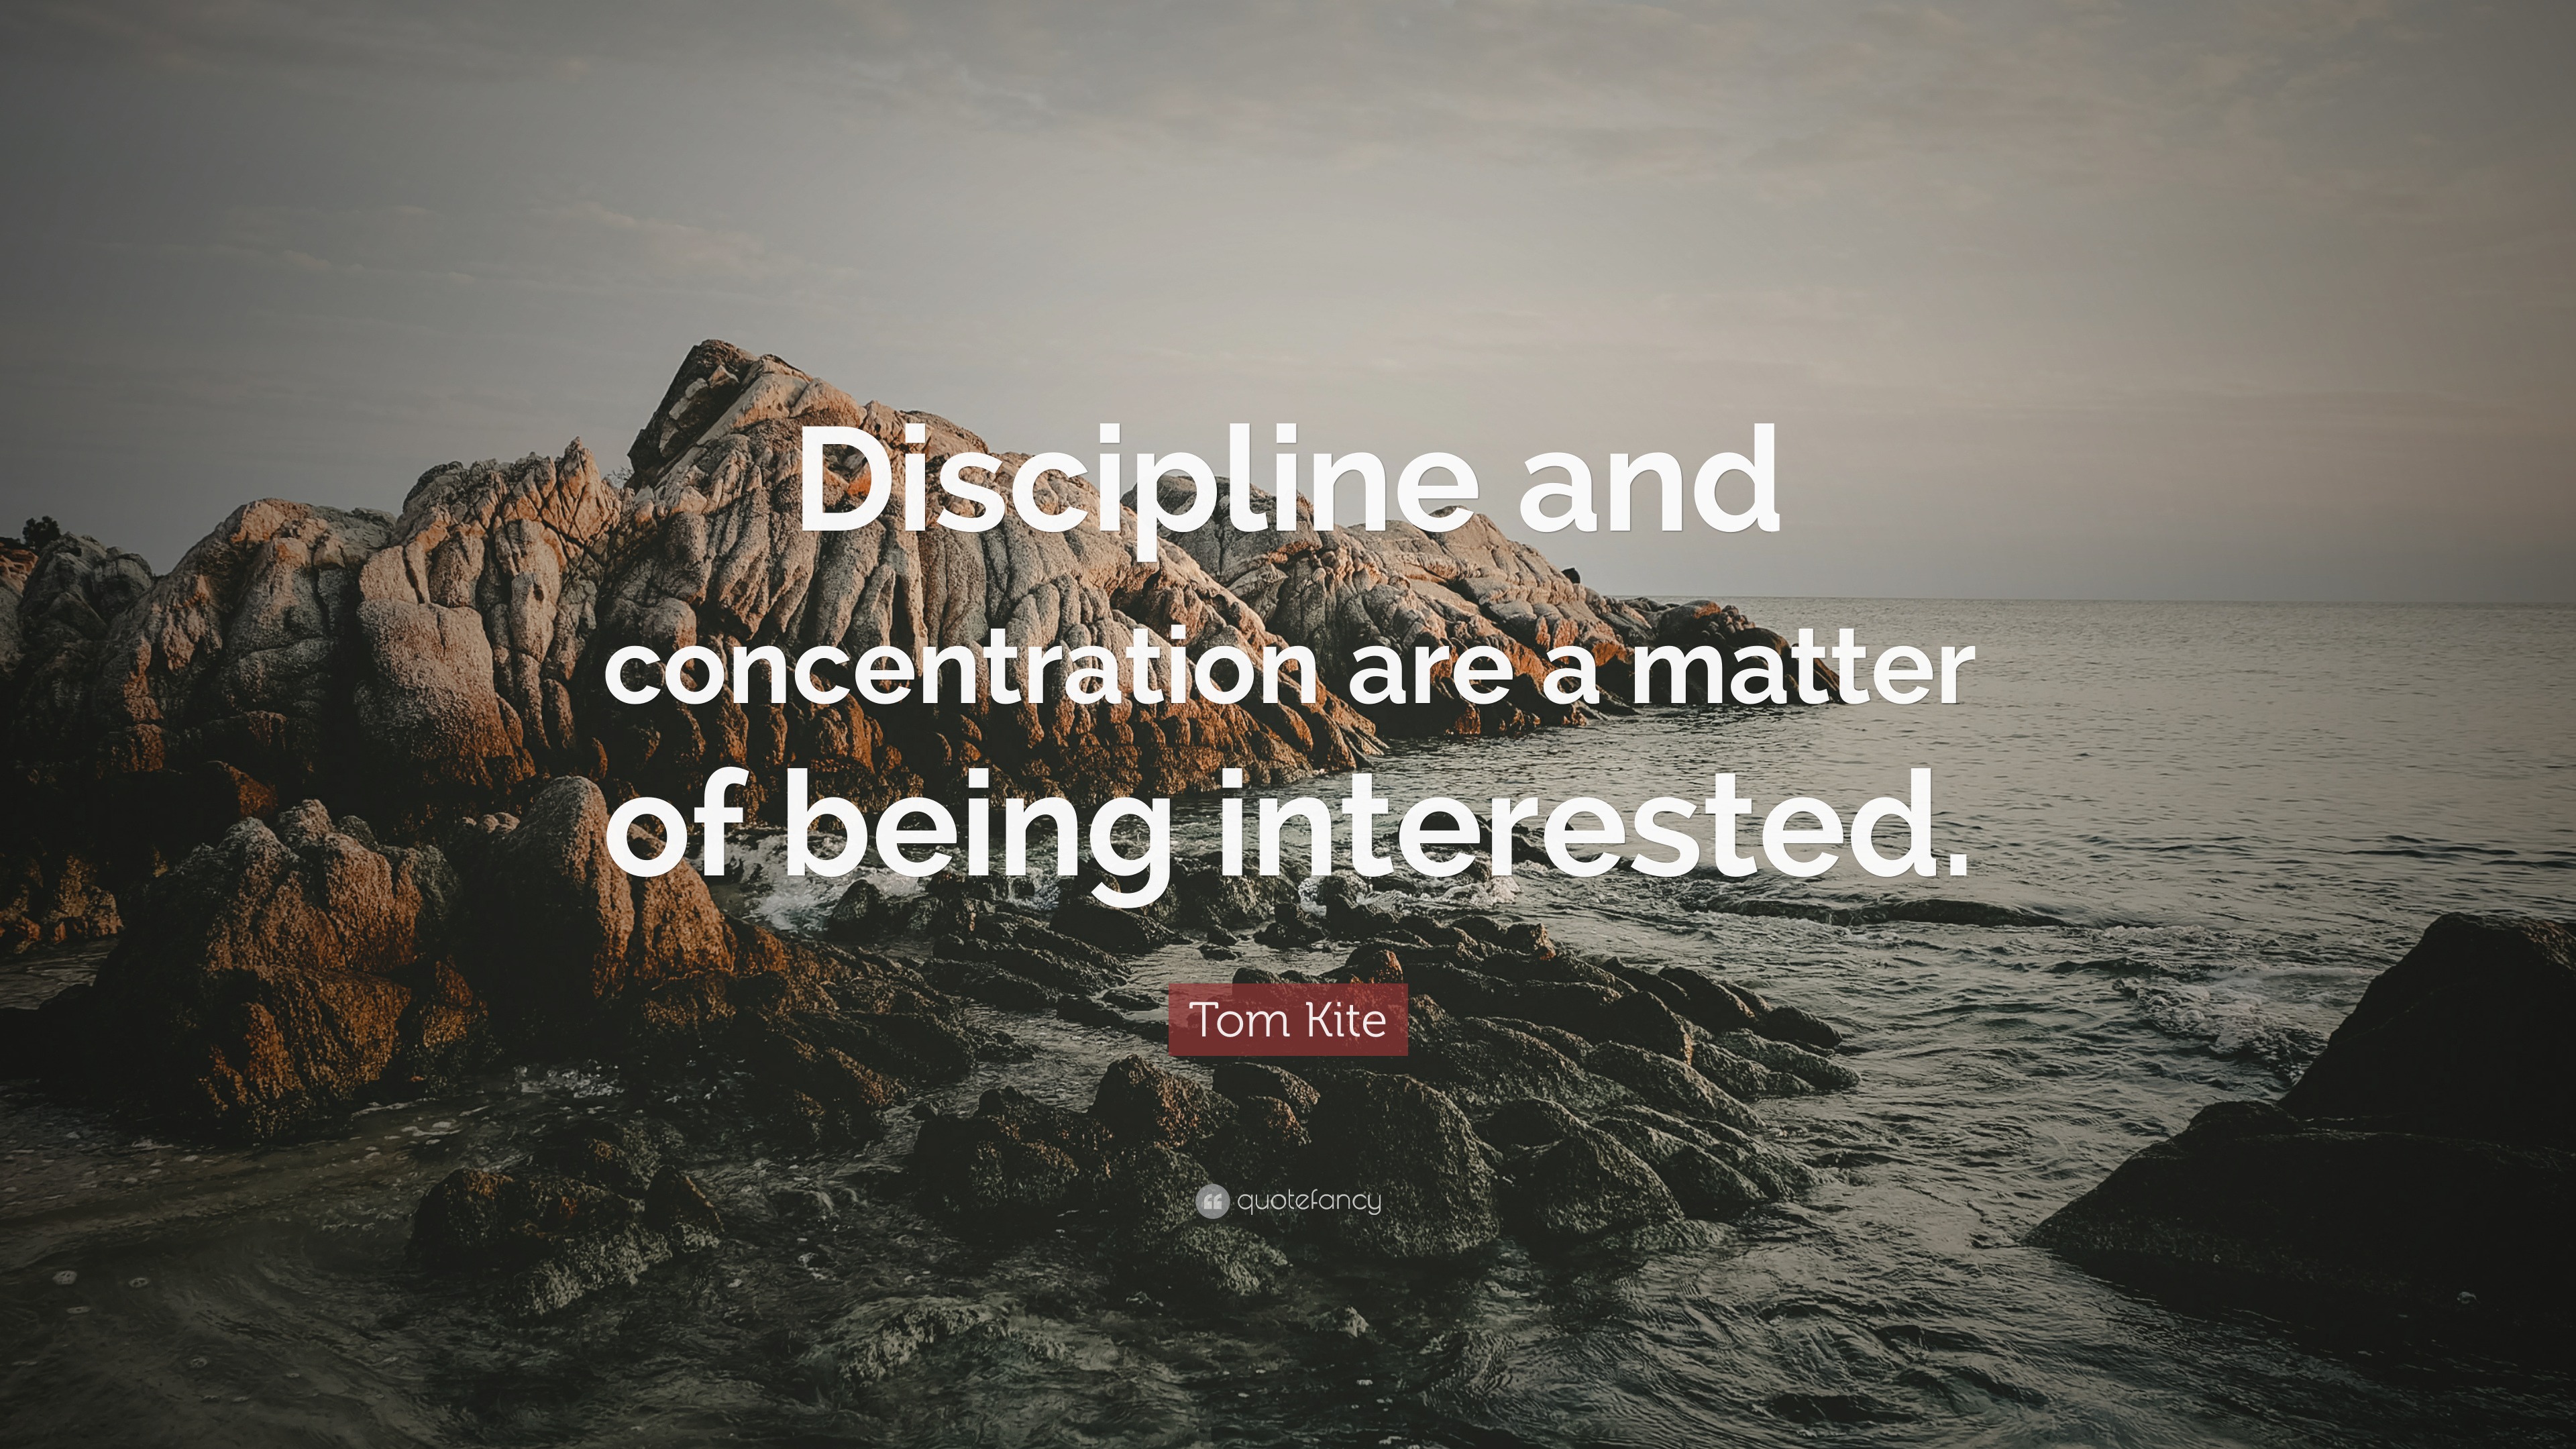 Tom Kite Quote: “Discipline and concentration are a matter of being ...